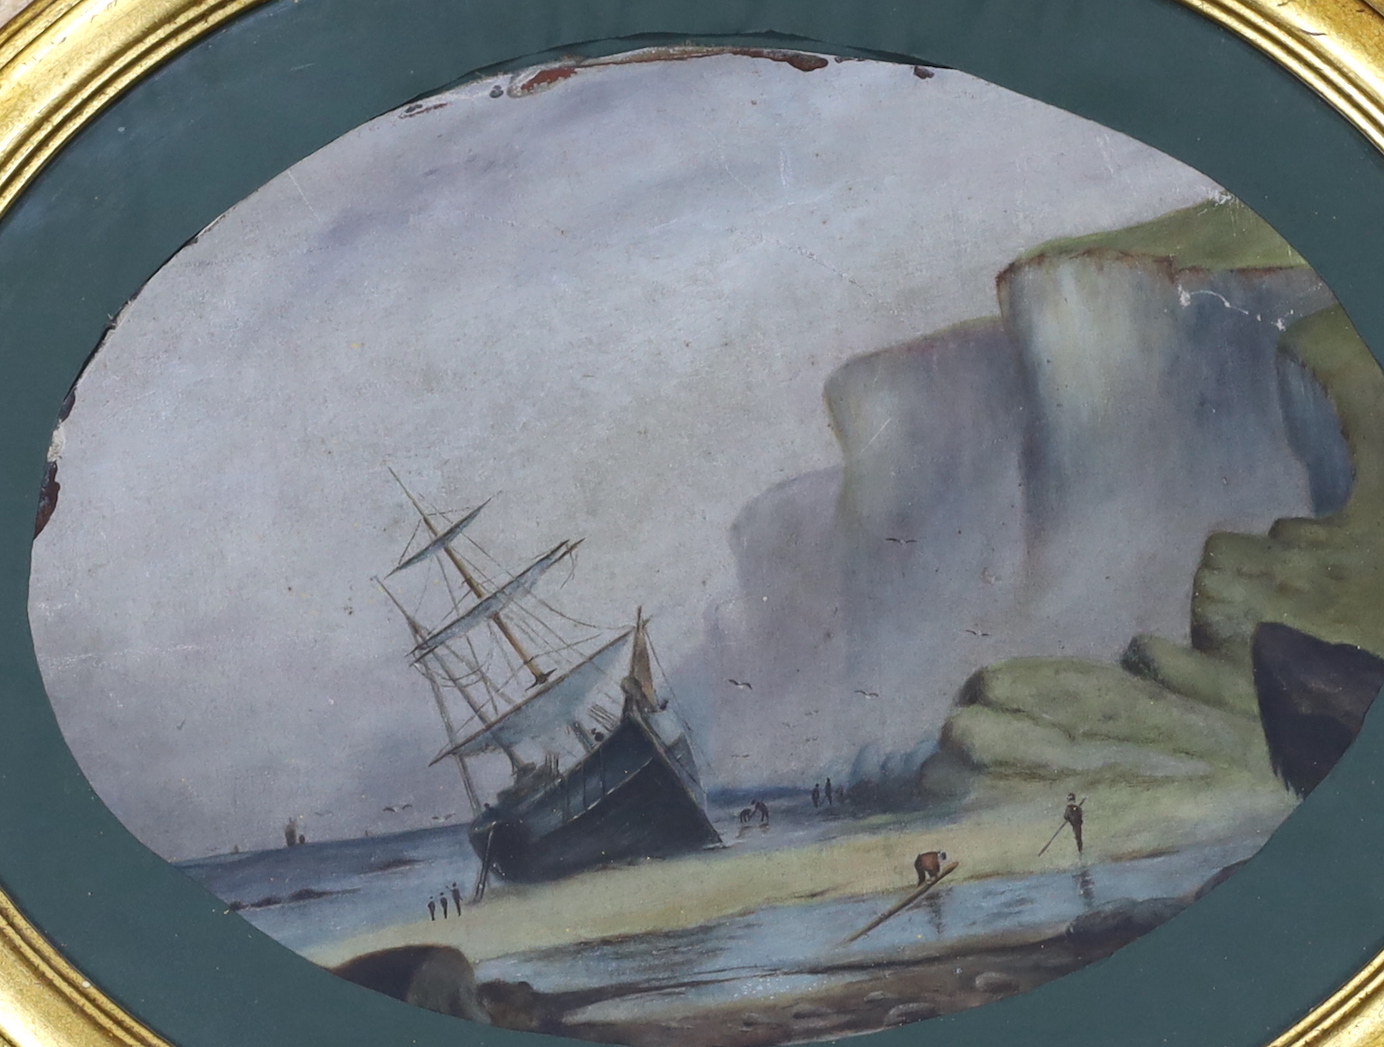 Late Victorian School, oval oil on unstretched canvas, Beached ship before cliffs, 40 x 28cm